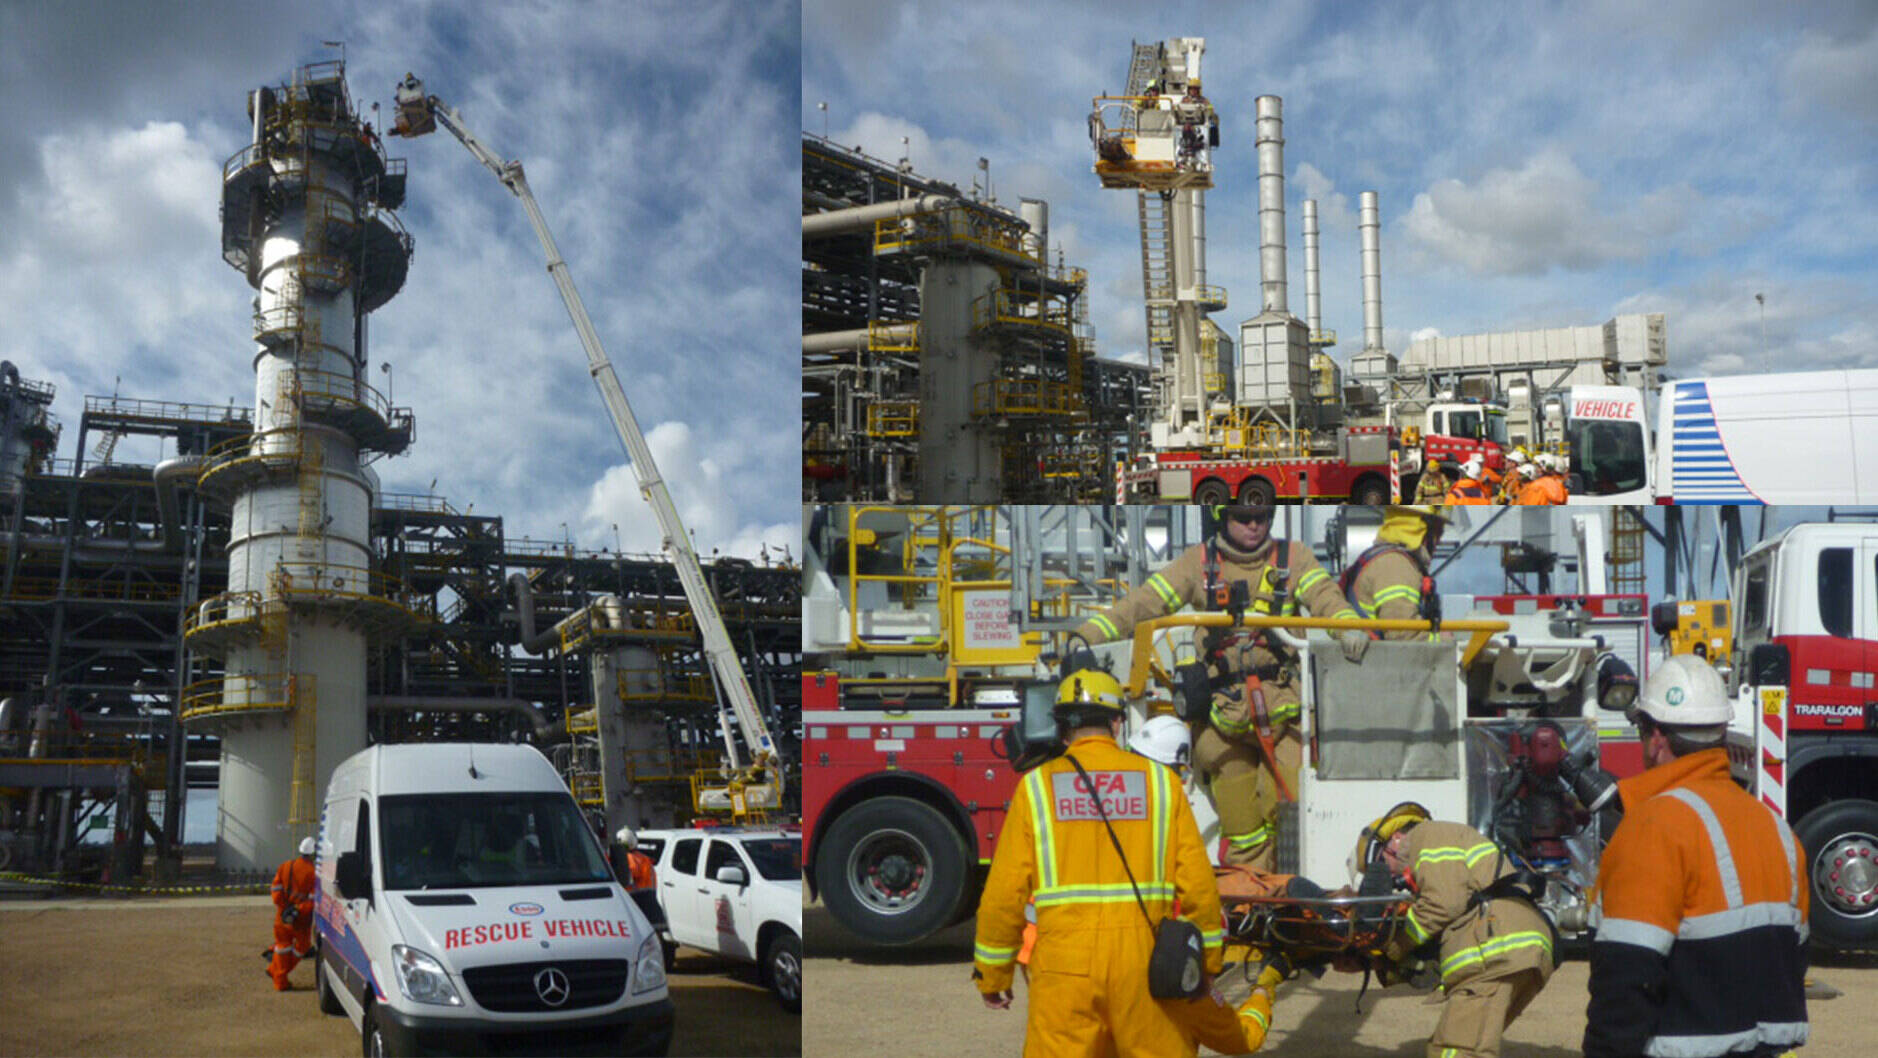 Image Photo  Longford Plants during the recent simulated emergency response exercise.